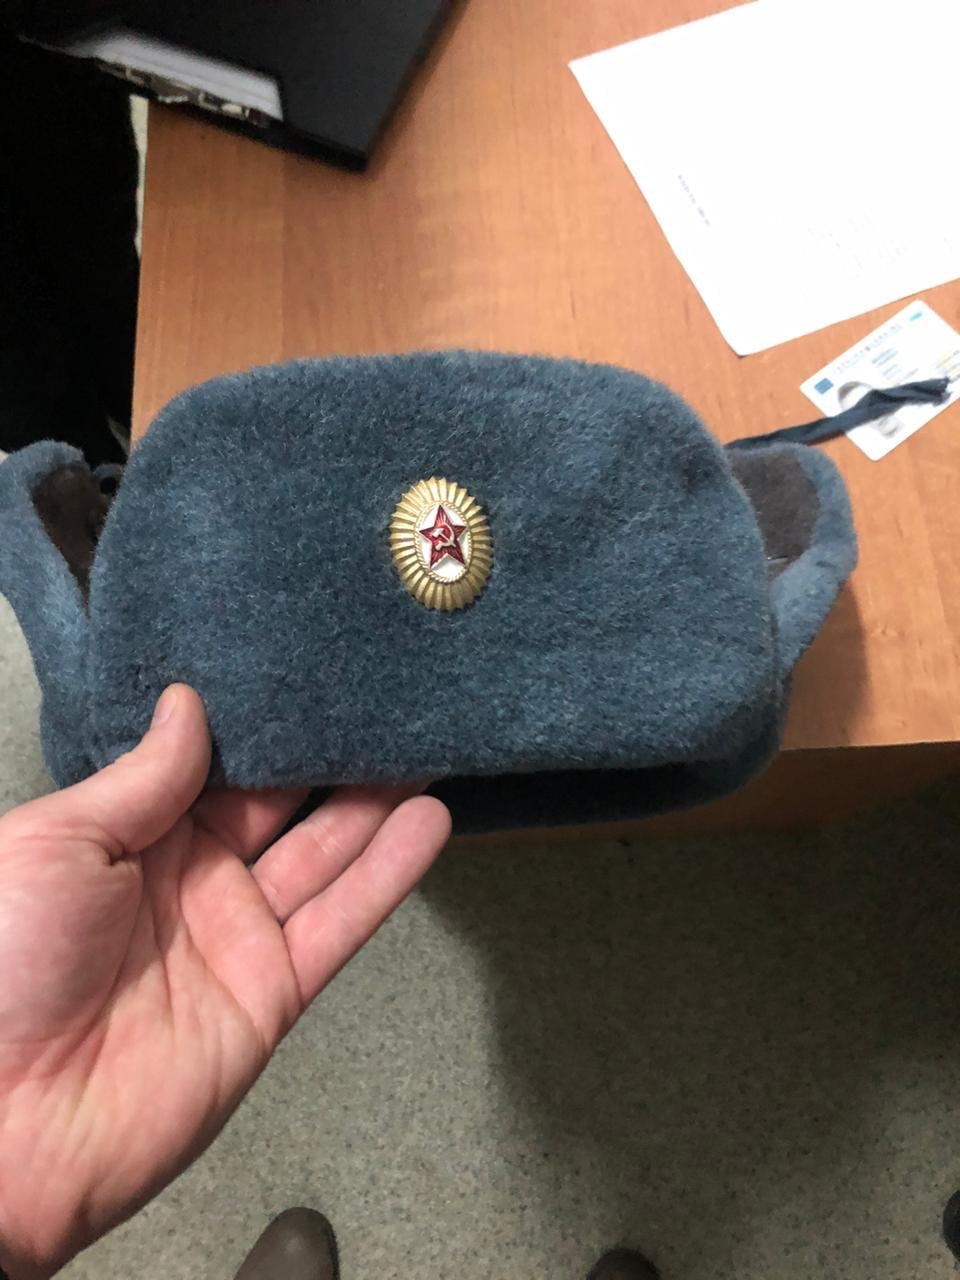 Protecting Naz....Democracy: Young Man In Ukraine Arrested For Wearing "Ushanka" With Soviet Star